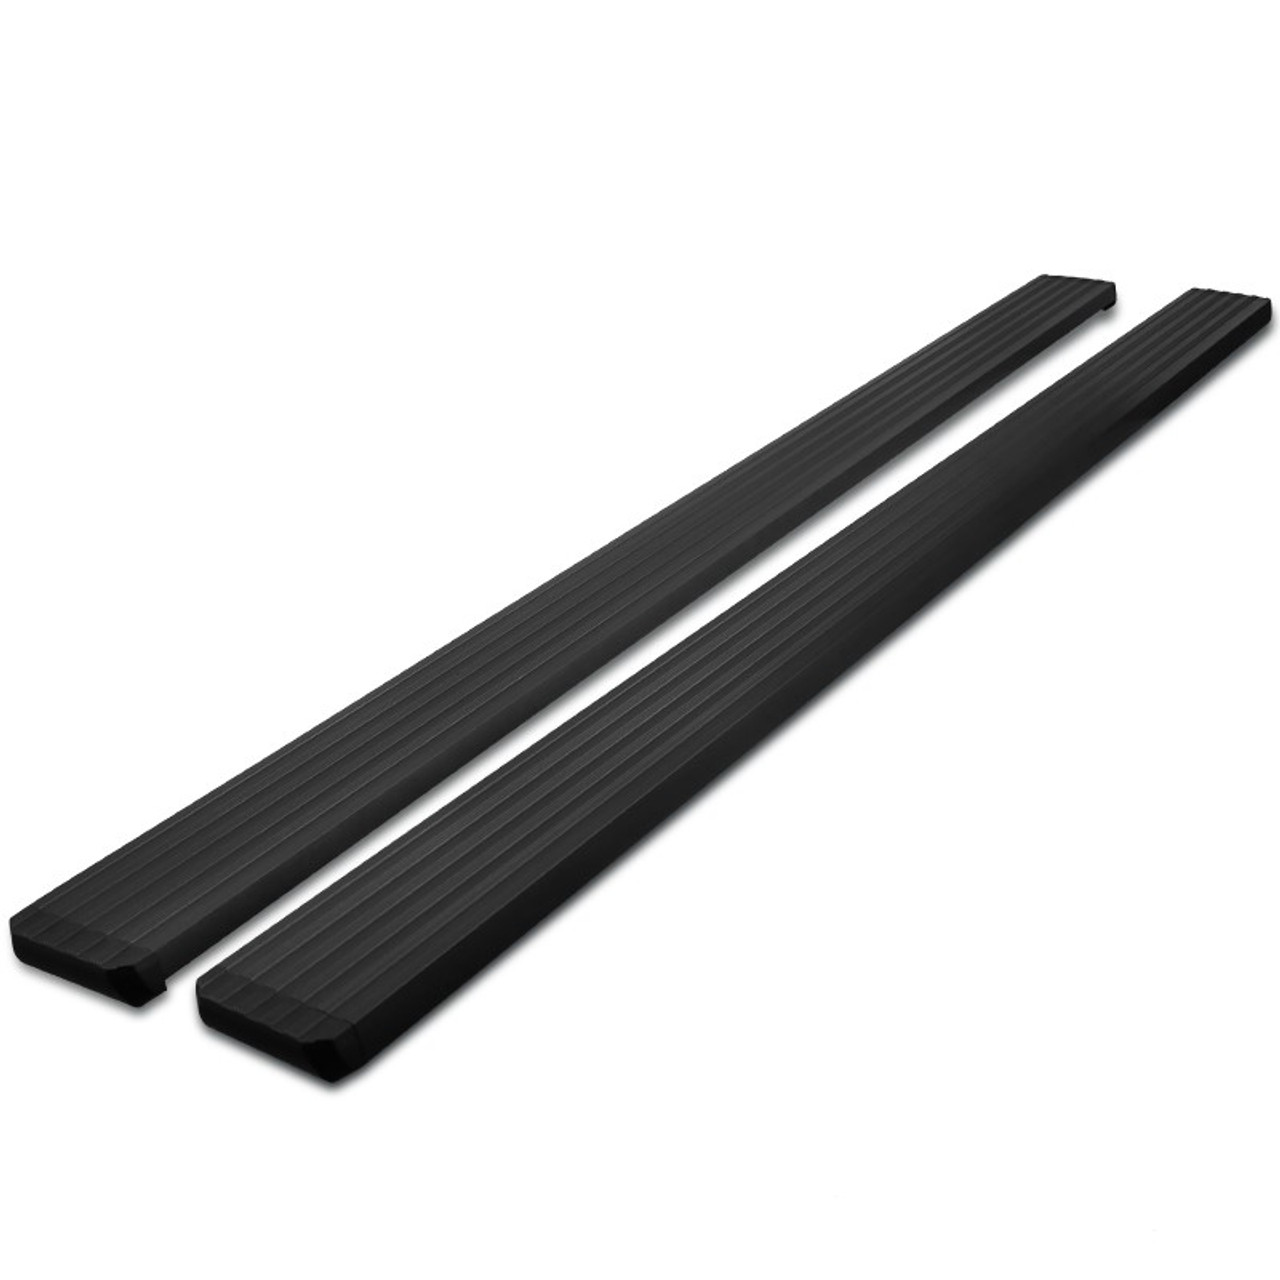 2pcs TAC Side Steps Running Boards Compatible with 2015-2022 Chevy Colorado/GMC Canyon Extended Cab Truck Pickup 4.25 Texture Black Side Bars Nerf Bars Off Road Accessories 